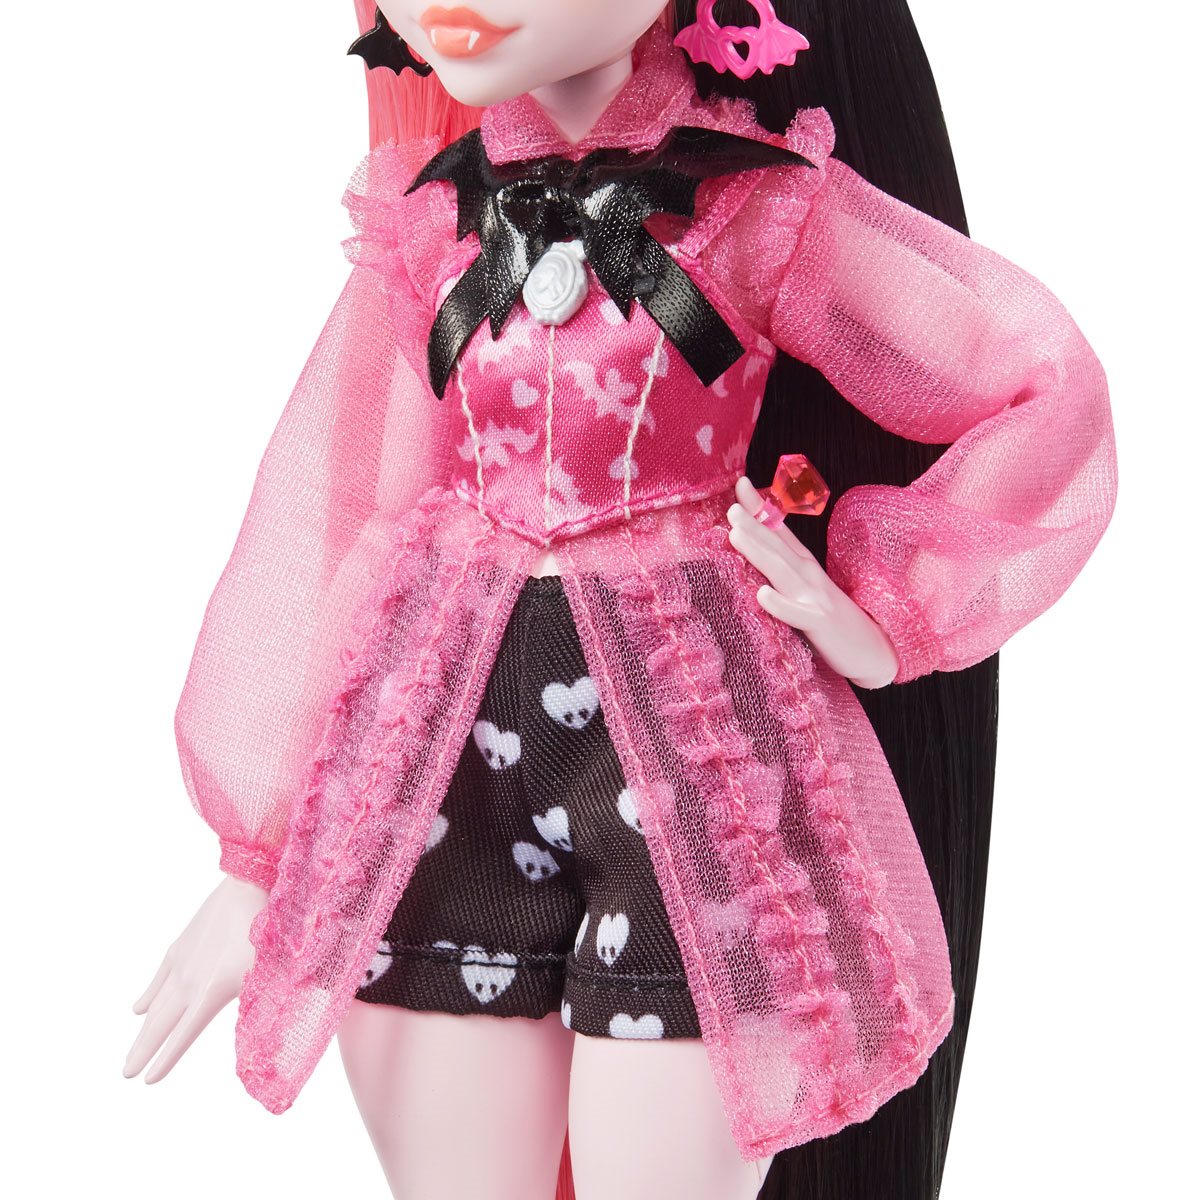 Netto Gangster Op risico Monster High Draculaura Doll - Entertainment Earth